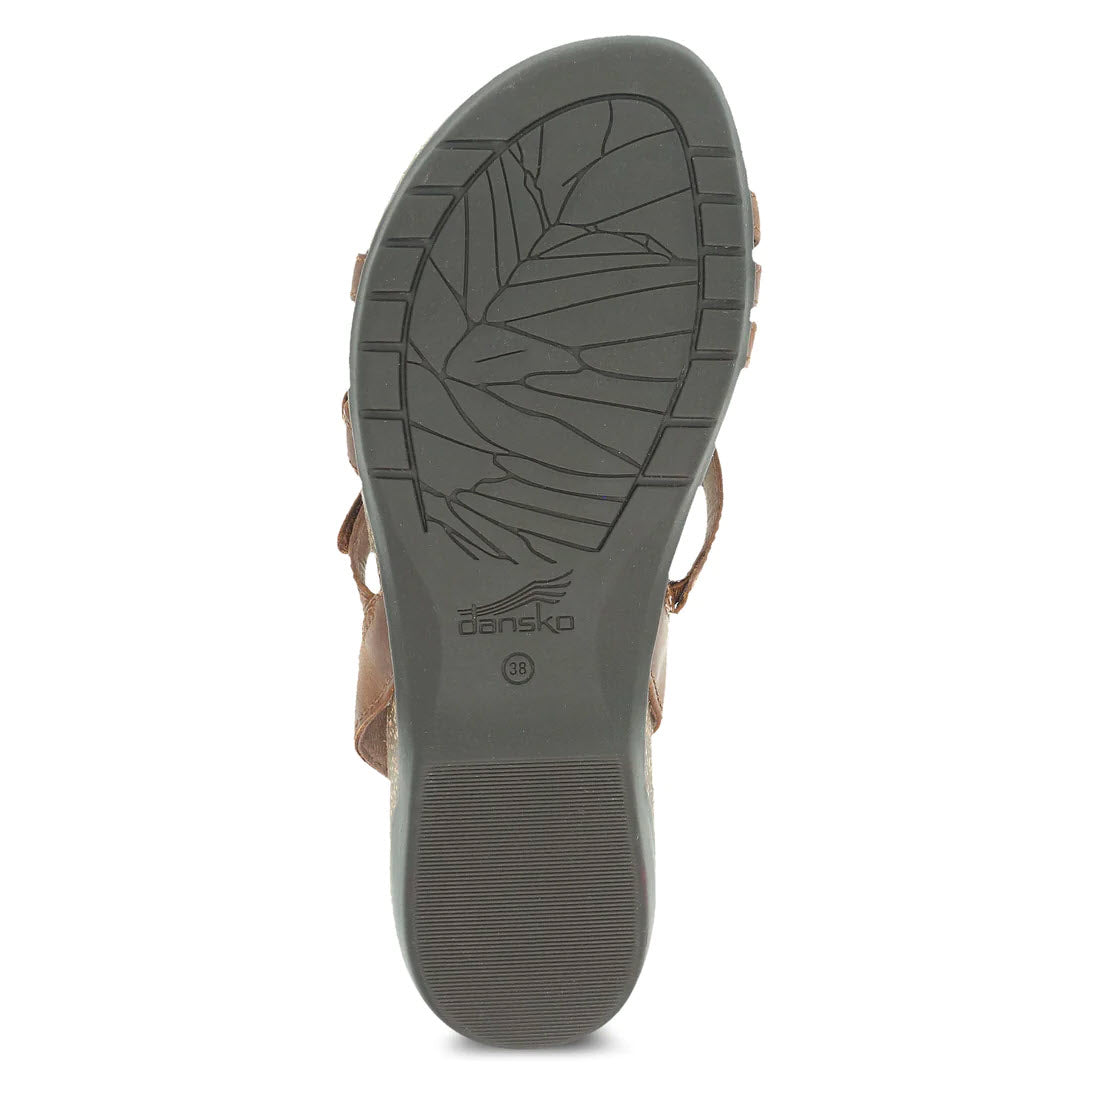 Bottom view of a fashionable, super supportive Dansko Roslyn Tan - Womens shoe showcasing its tread design and brand logo.